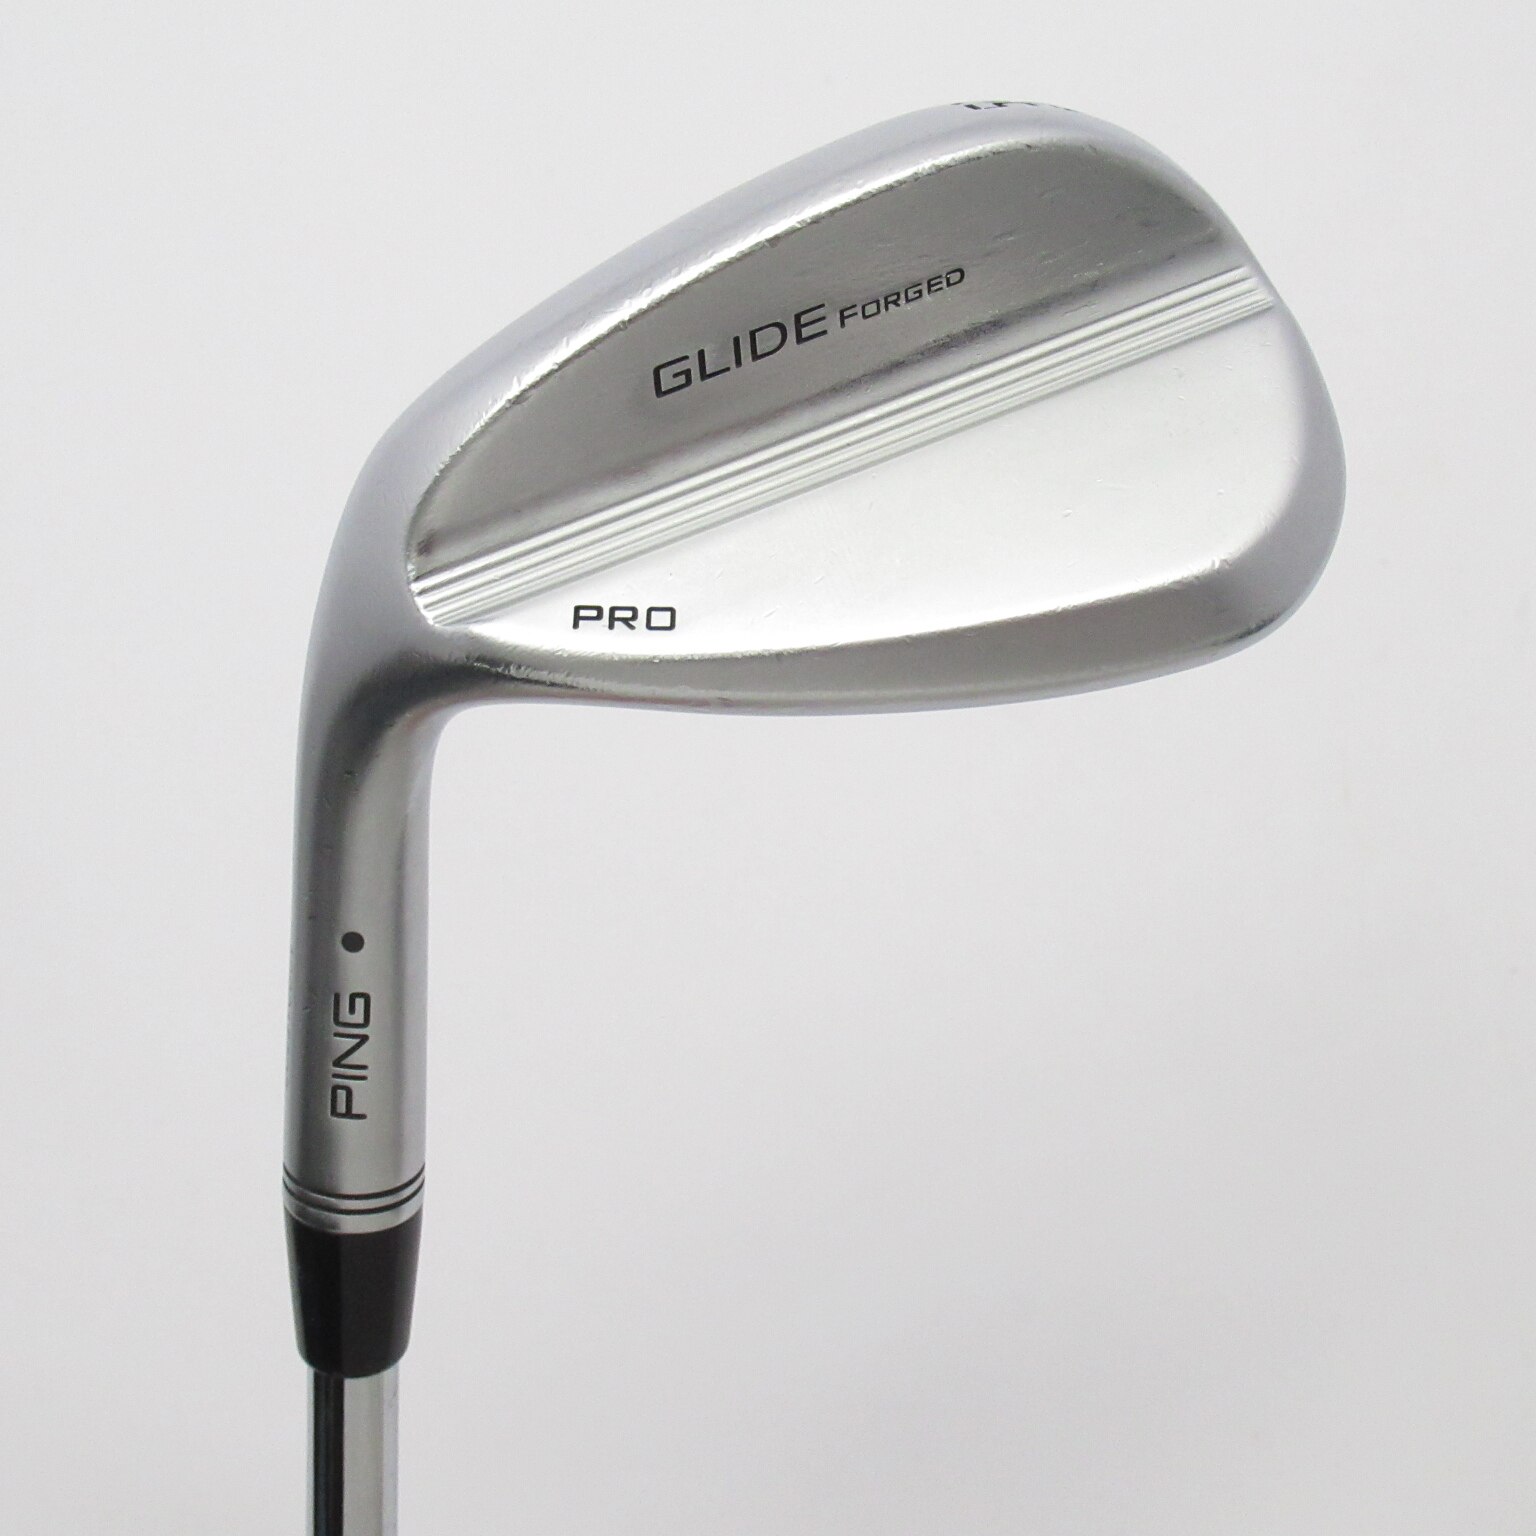 Ping Glide ForgedPro 50°レフティーウェッジ